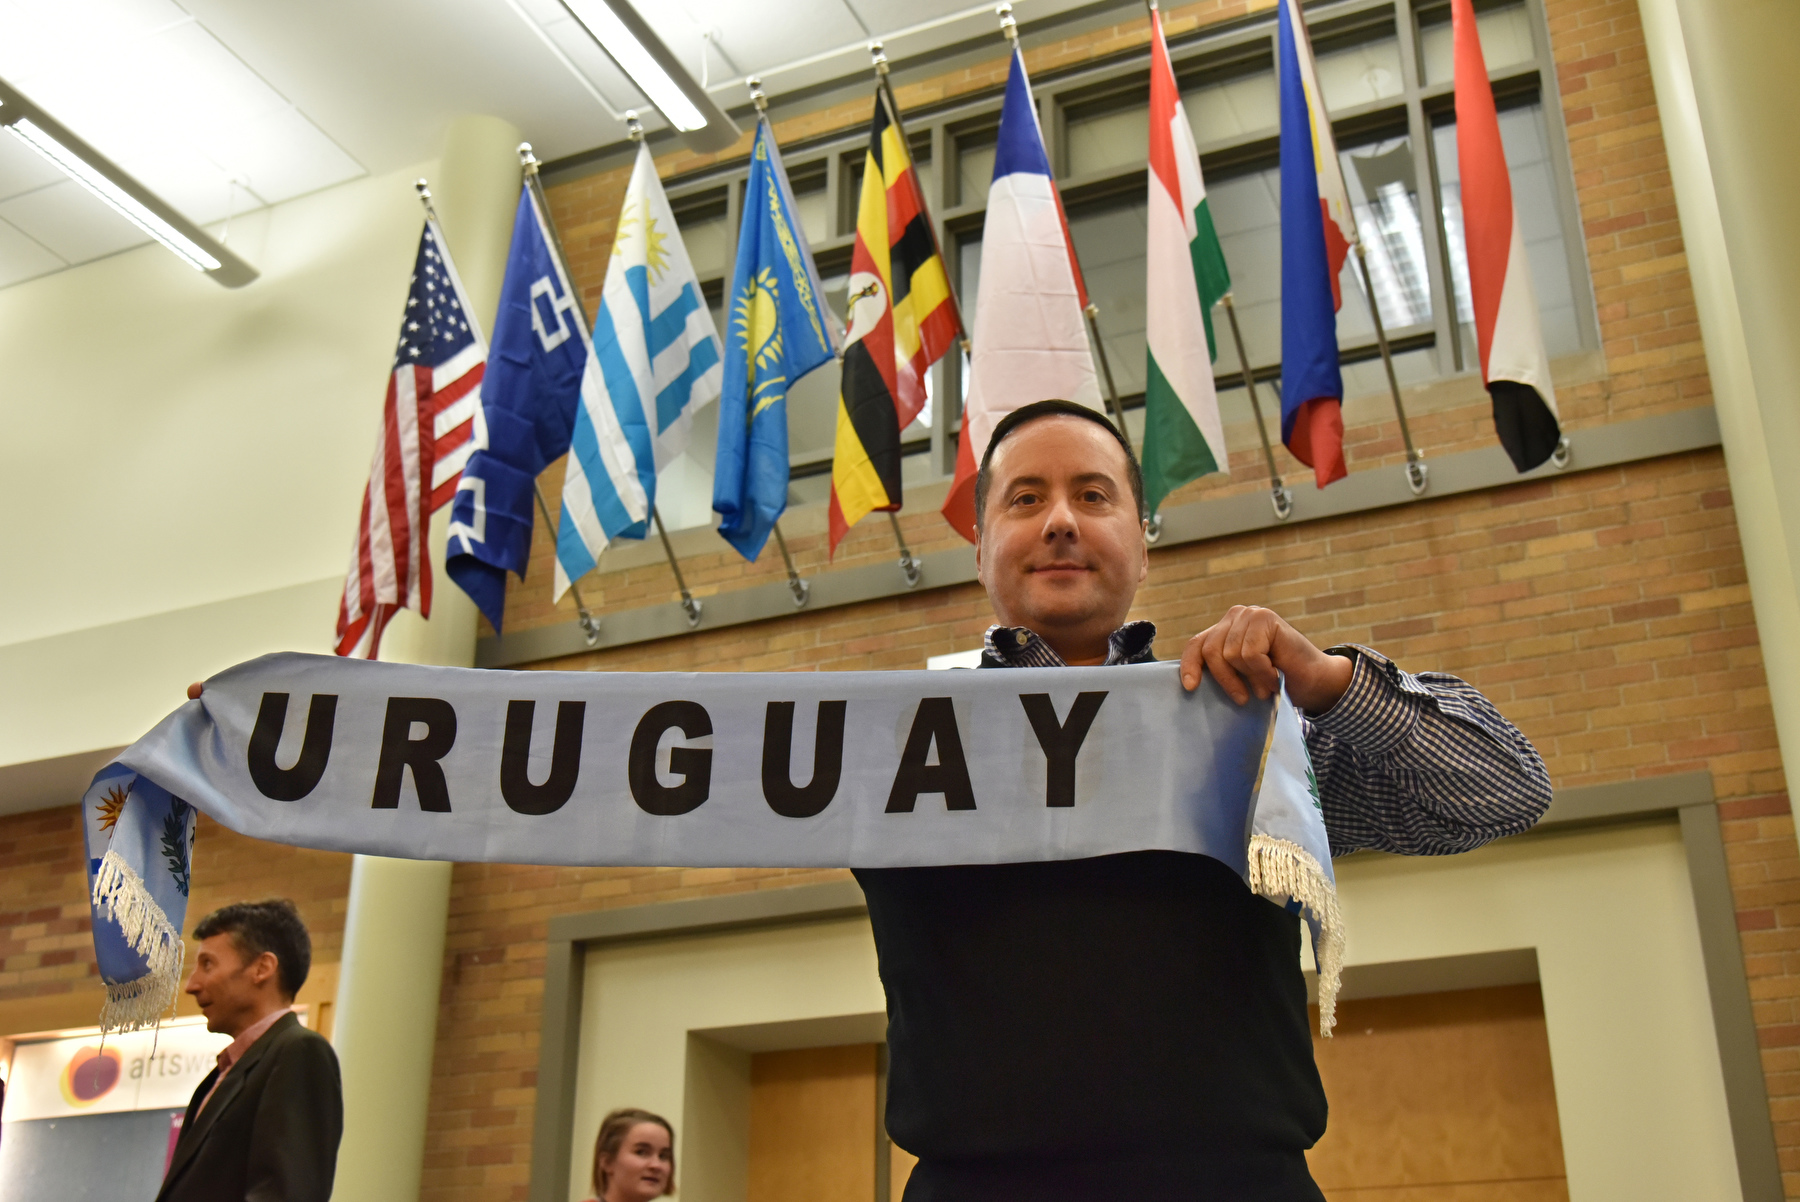 A Flags of Nations reception was held to recognize the updated additions to SUNY Oswego's Flags of Nations display located along the Marano Center concourse. The ceremony recognized the addition of flags representing the Haudenosaunee Confederacy and the countries of Chile, Uganda, Kazakhstan and Uruguay to the display. Pictured is Gonzalo Aguiar Malosetti, a modern languages and literatures faculty member, representing Uruguay near the display.